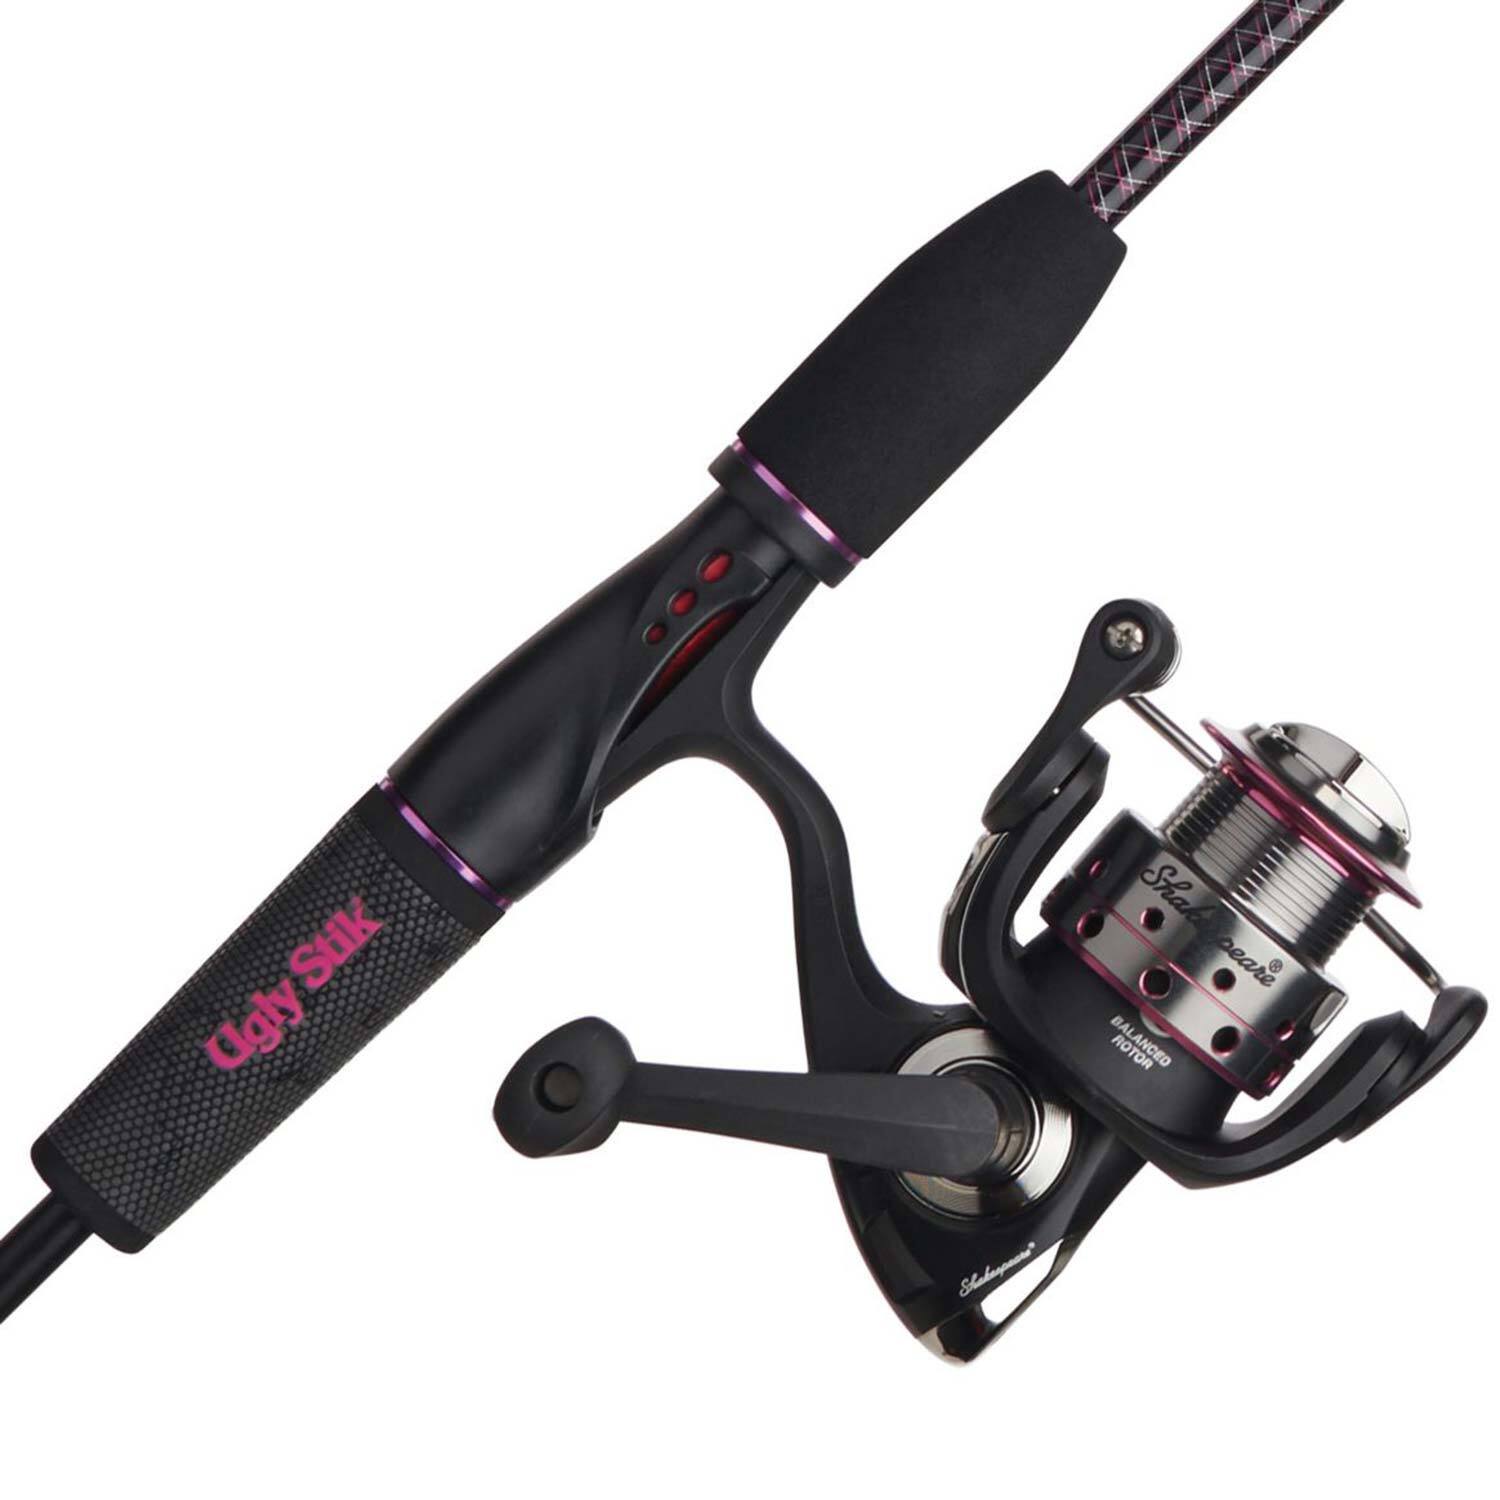 SHAKESPEARE UGLY STIK GX2 YOUTH SPINNING COMBO 5'6 MEDIUM - Lefebvre's  Source For Adventure